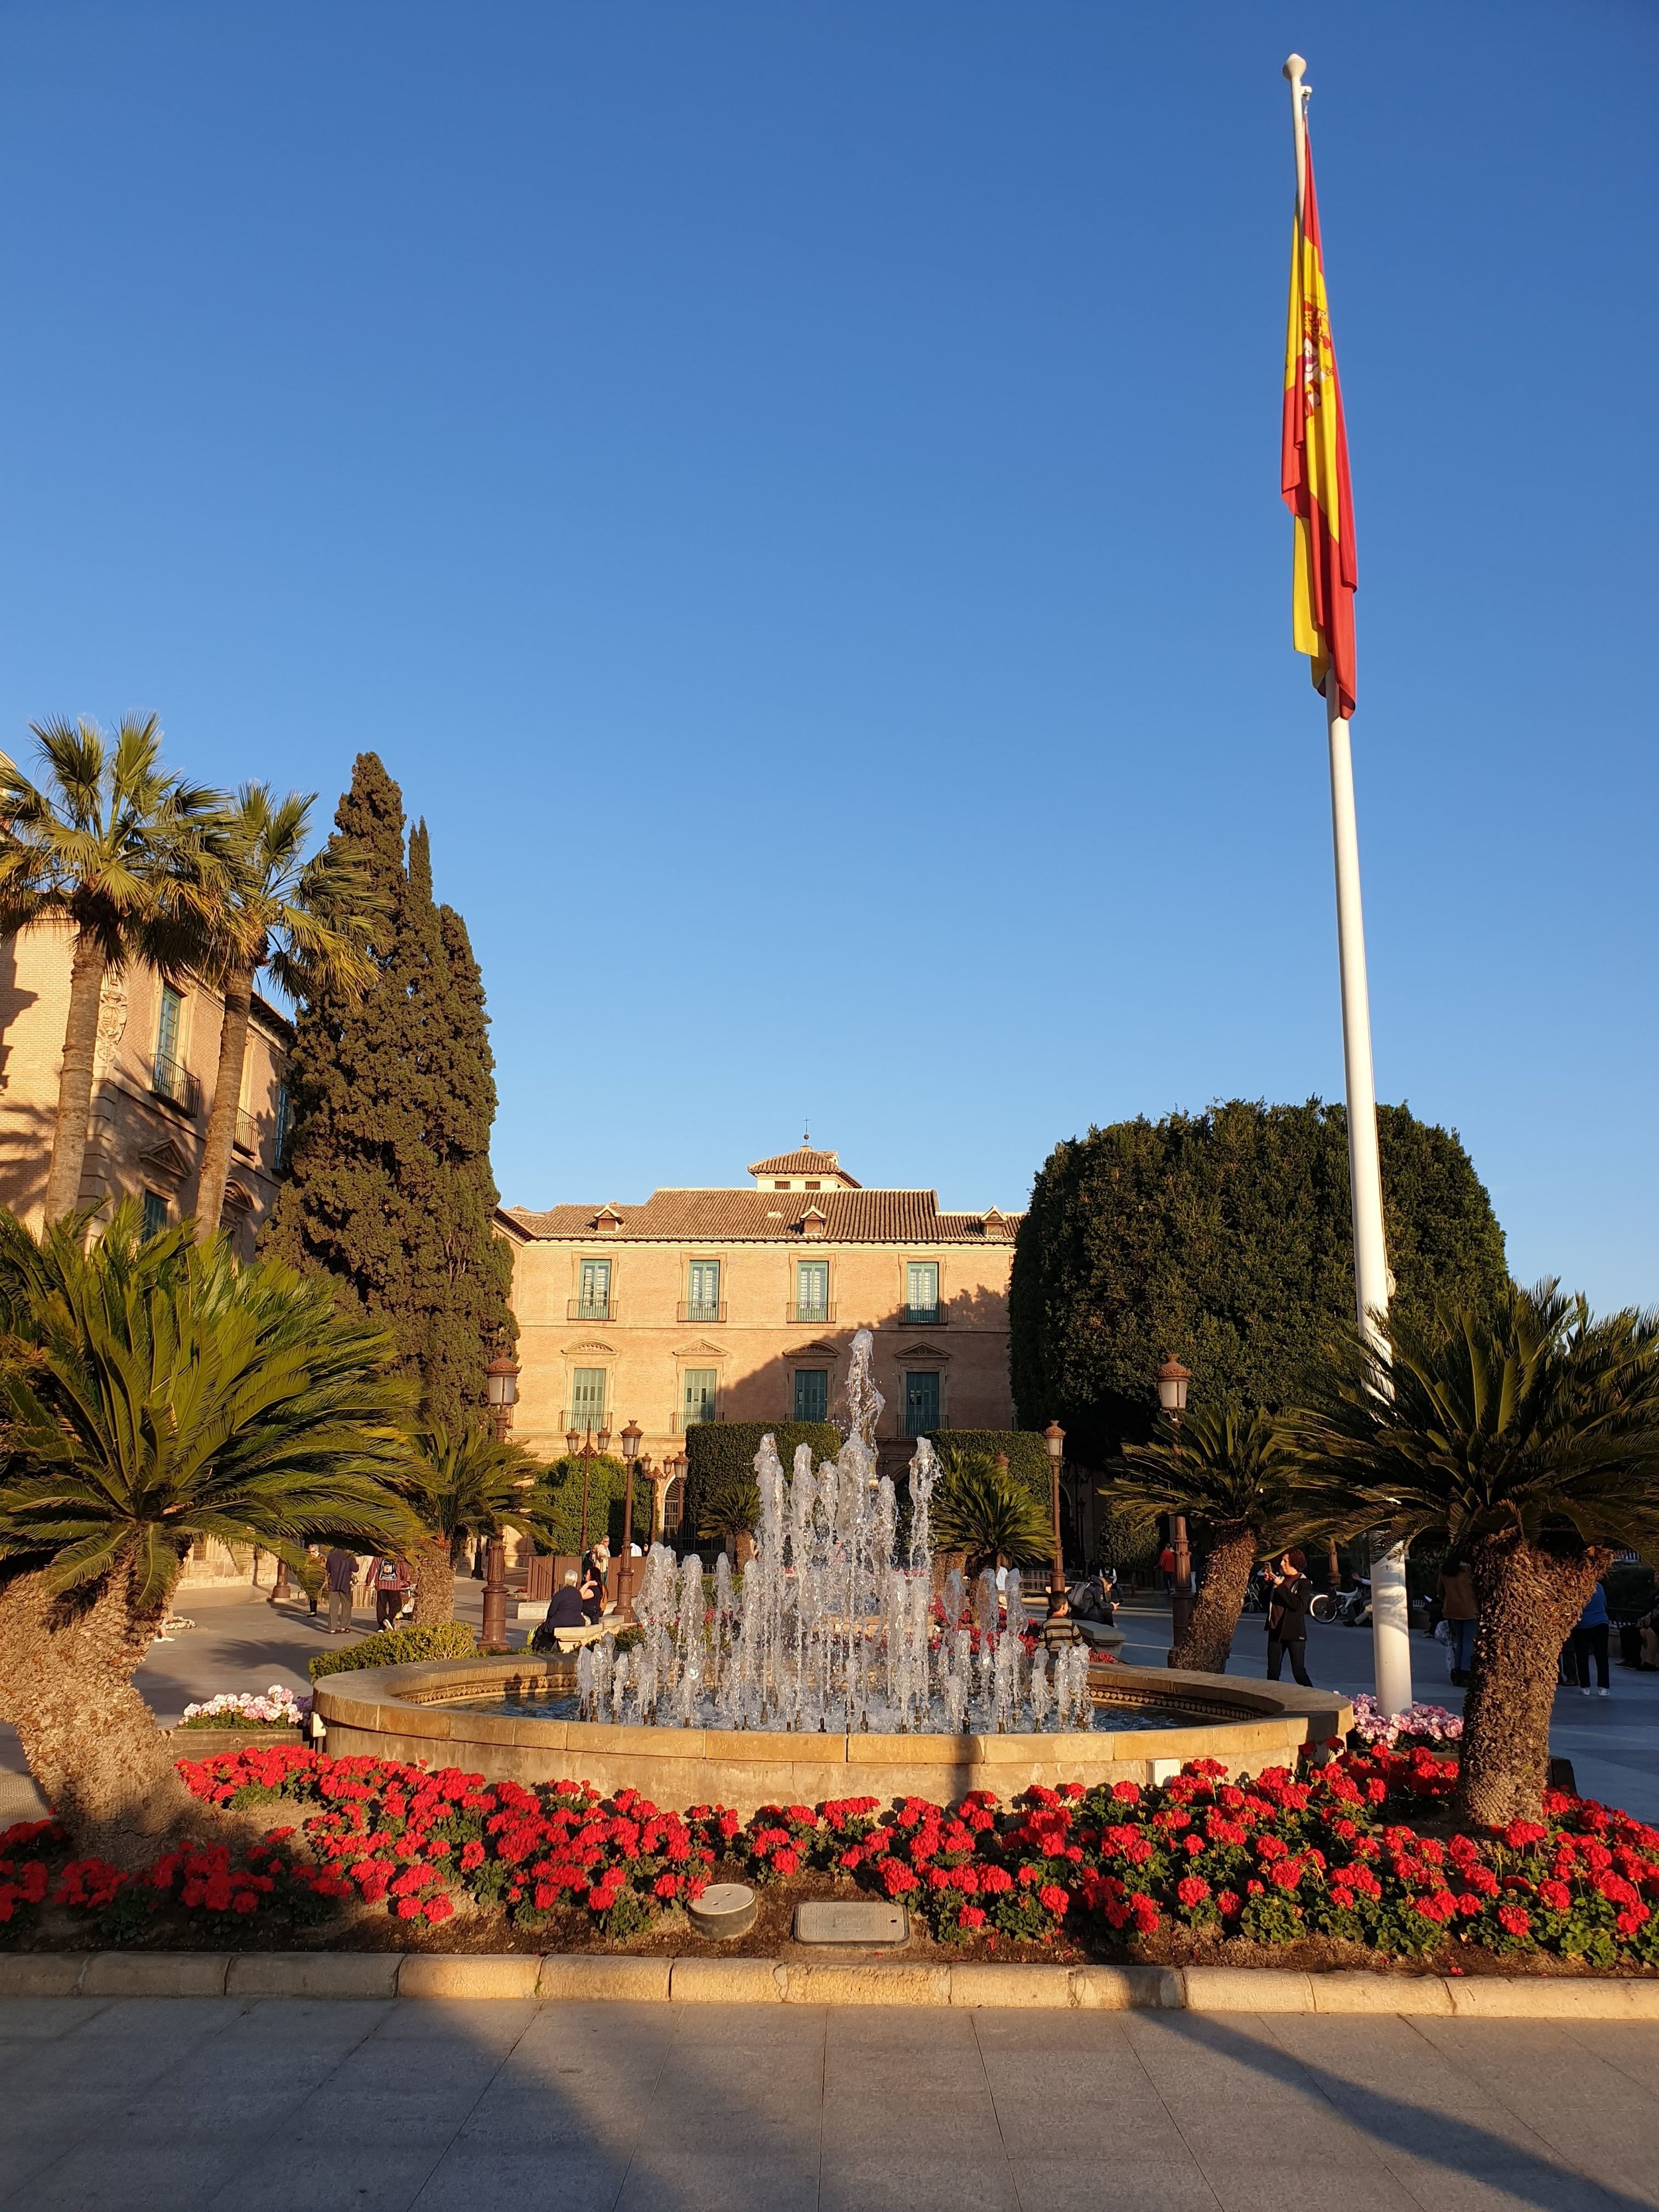 Everything about Murcia is cheerfully red!